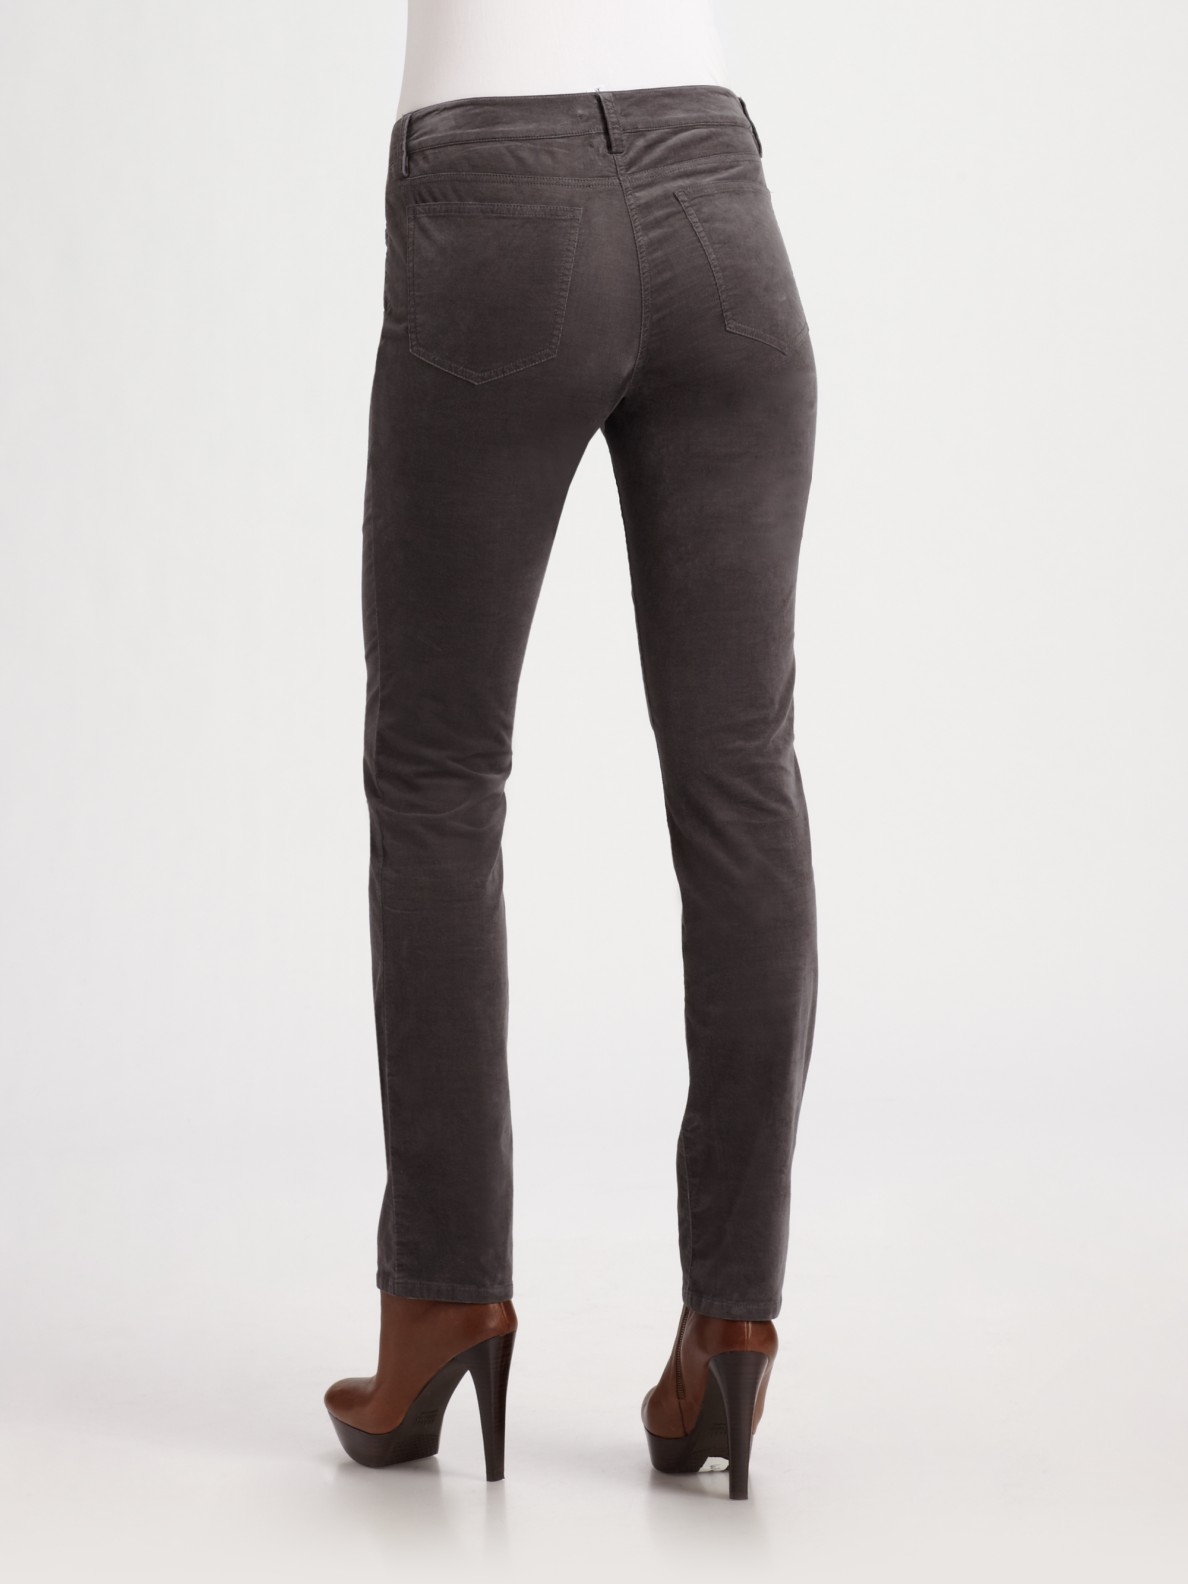 Eileen Fisher Stretch Corduroy Pants in Brown - Lyst